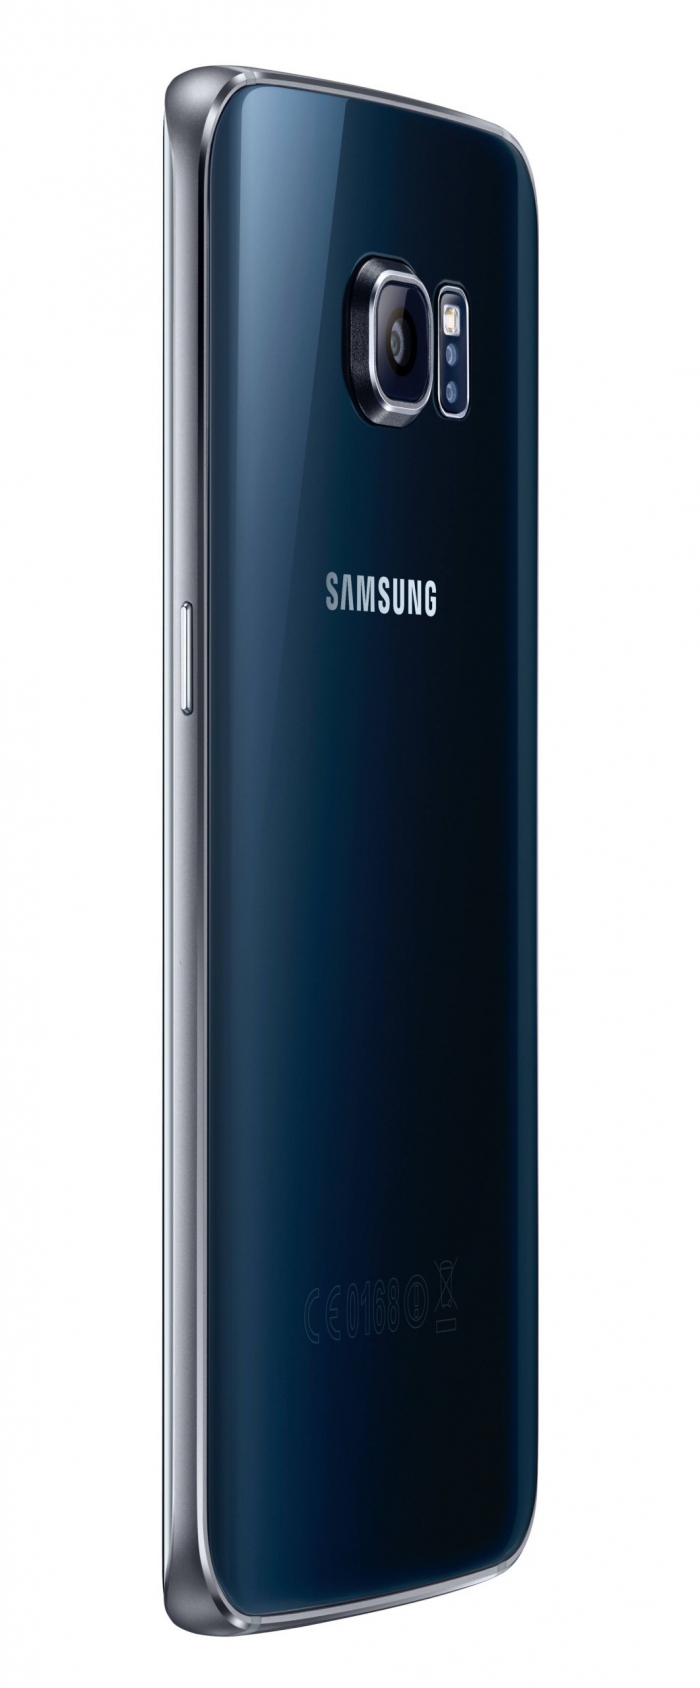 /source/pages/phonesell/samsung/Samsung_G925_F_32Gb_Galaxy_S6_edge_black/Samsung_G925_F_32Gb_Galaxy_S6_edge_black7.jpg